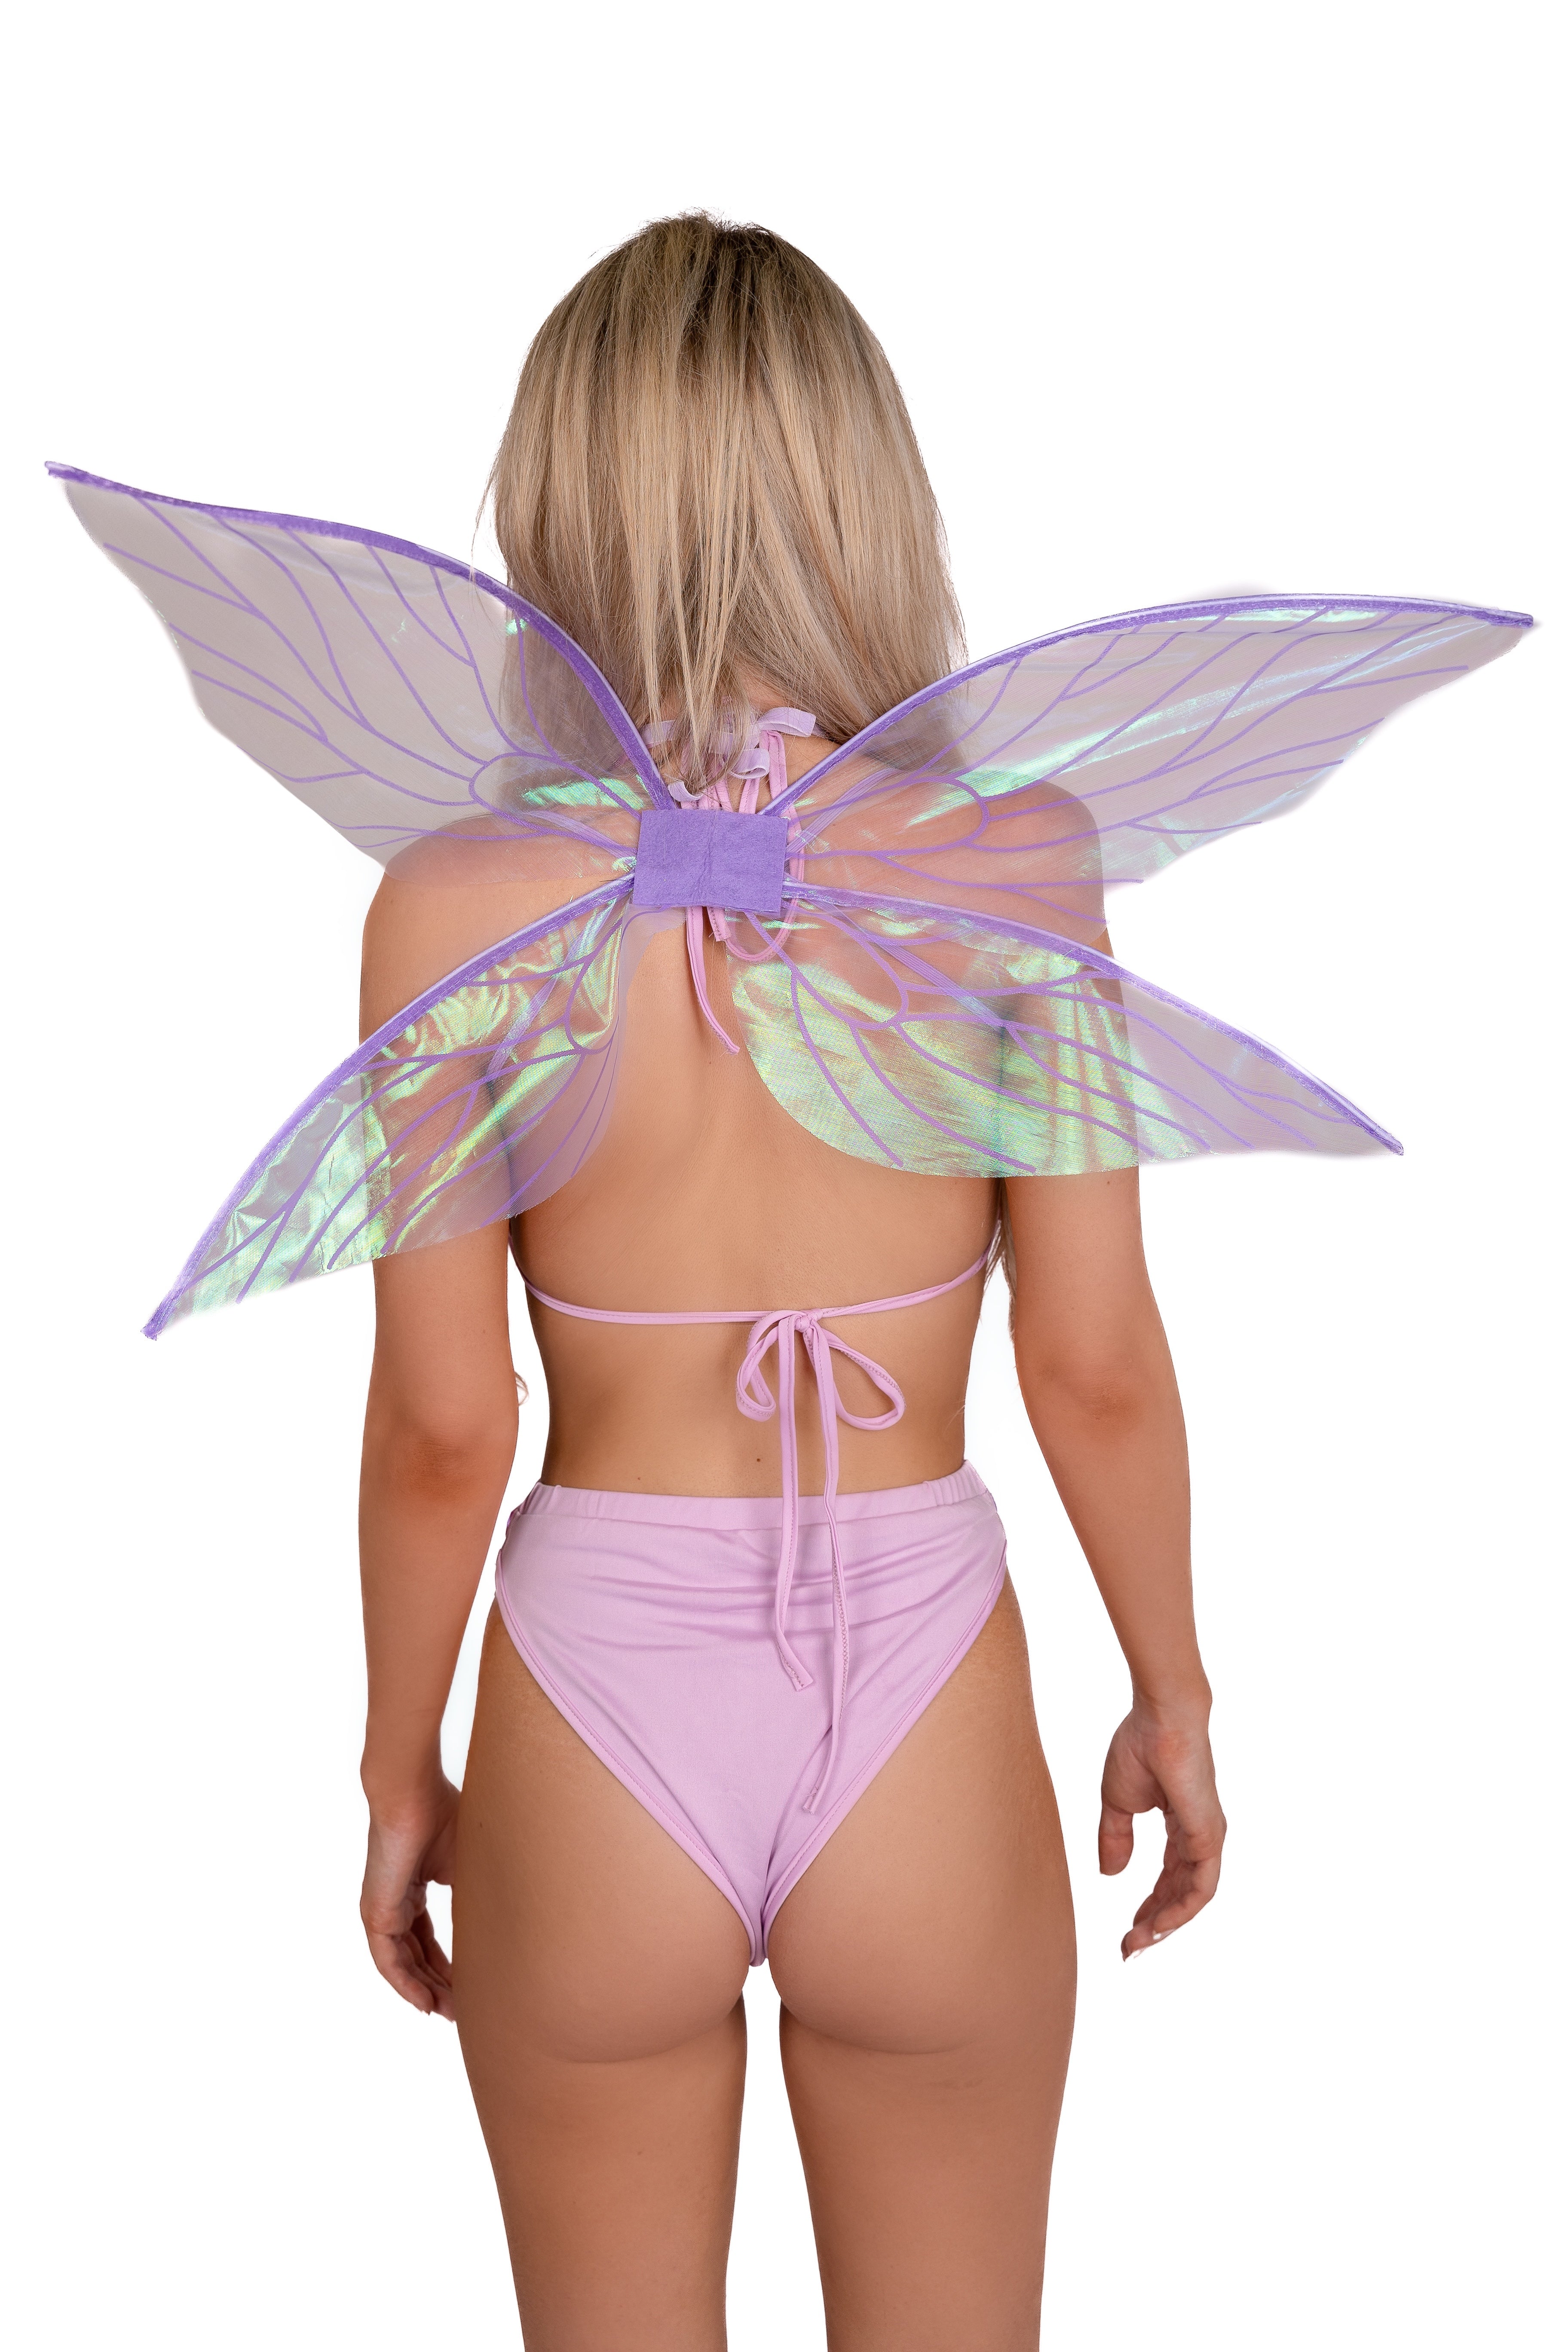 FULL OUTFIT- Lavender Dream Fairy